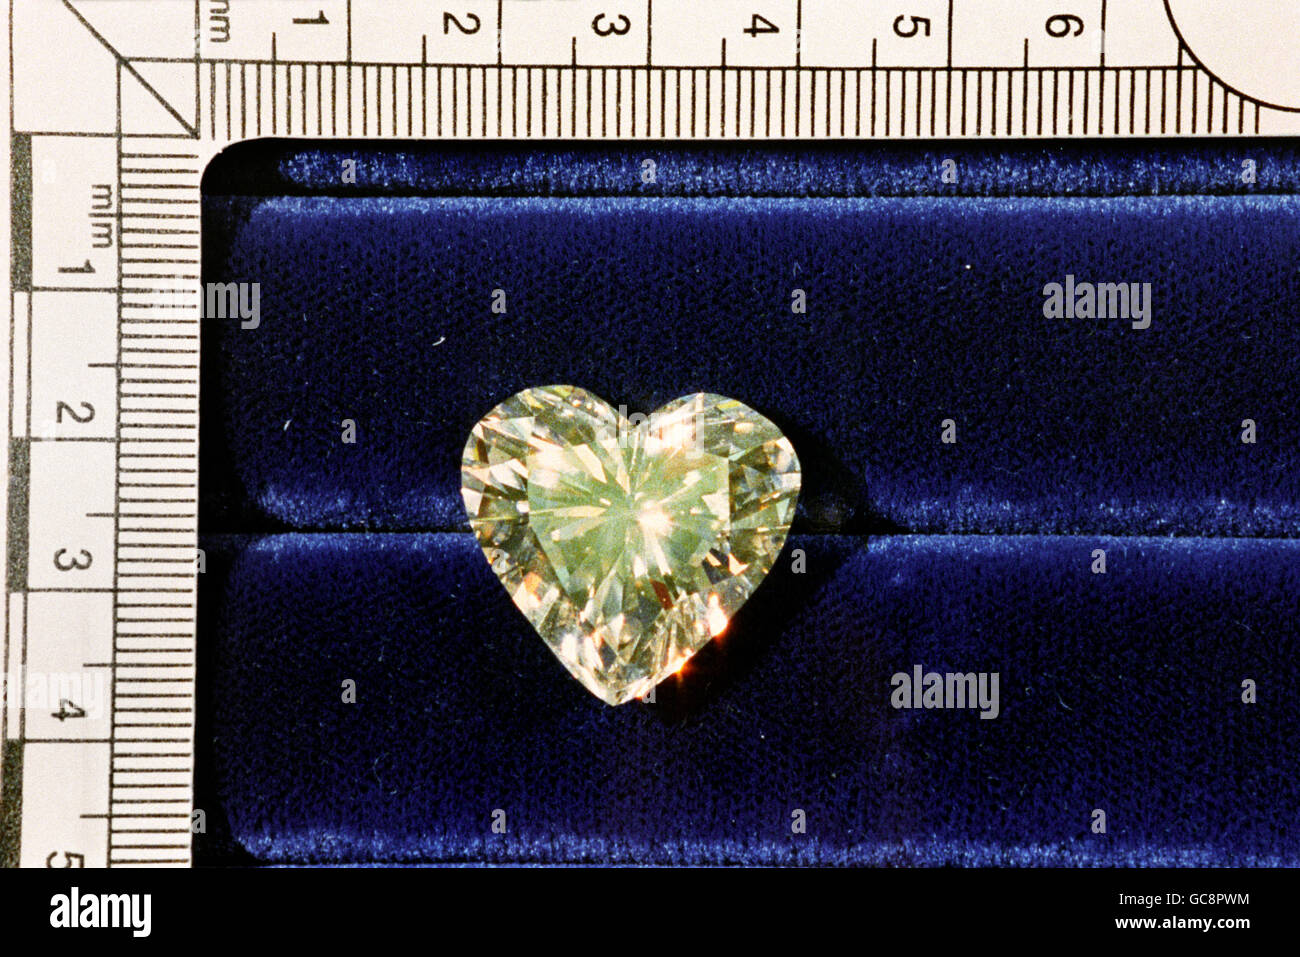 A HEART-SHAPED DIAMOND SIMILAR TO THE JEWEL STOLEN FROM GRAFF JEWELLERY MANUFACTURERS OF HATTON GARDEN, LONDON. THE GEM, VALUED AT 1.5 MILLION POUNDS, IS APPROXIMATELY THE SIZE OF A ONE POUND COIN. Stock Photo